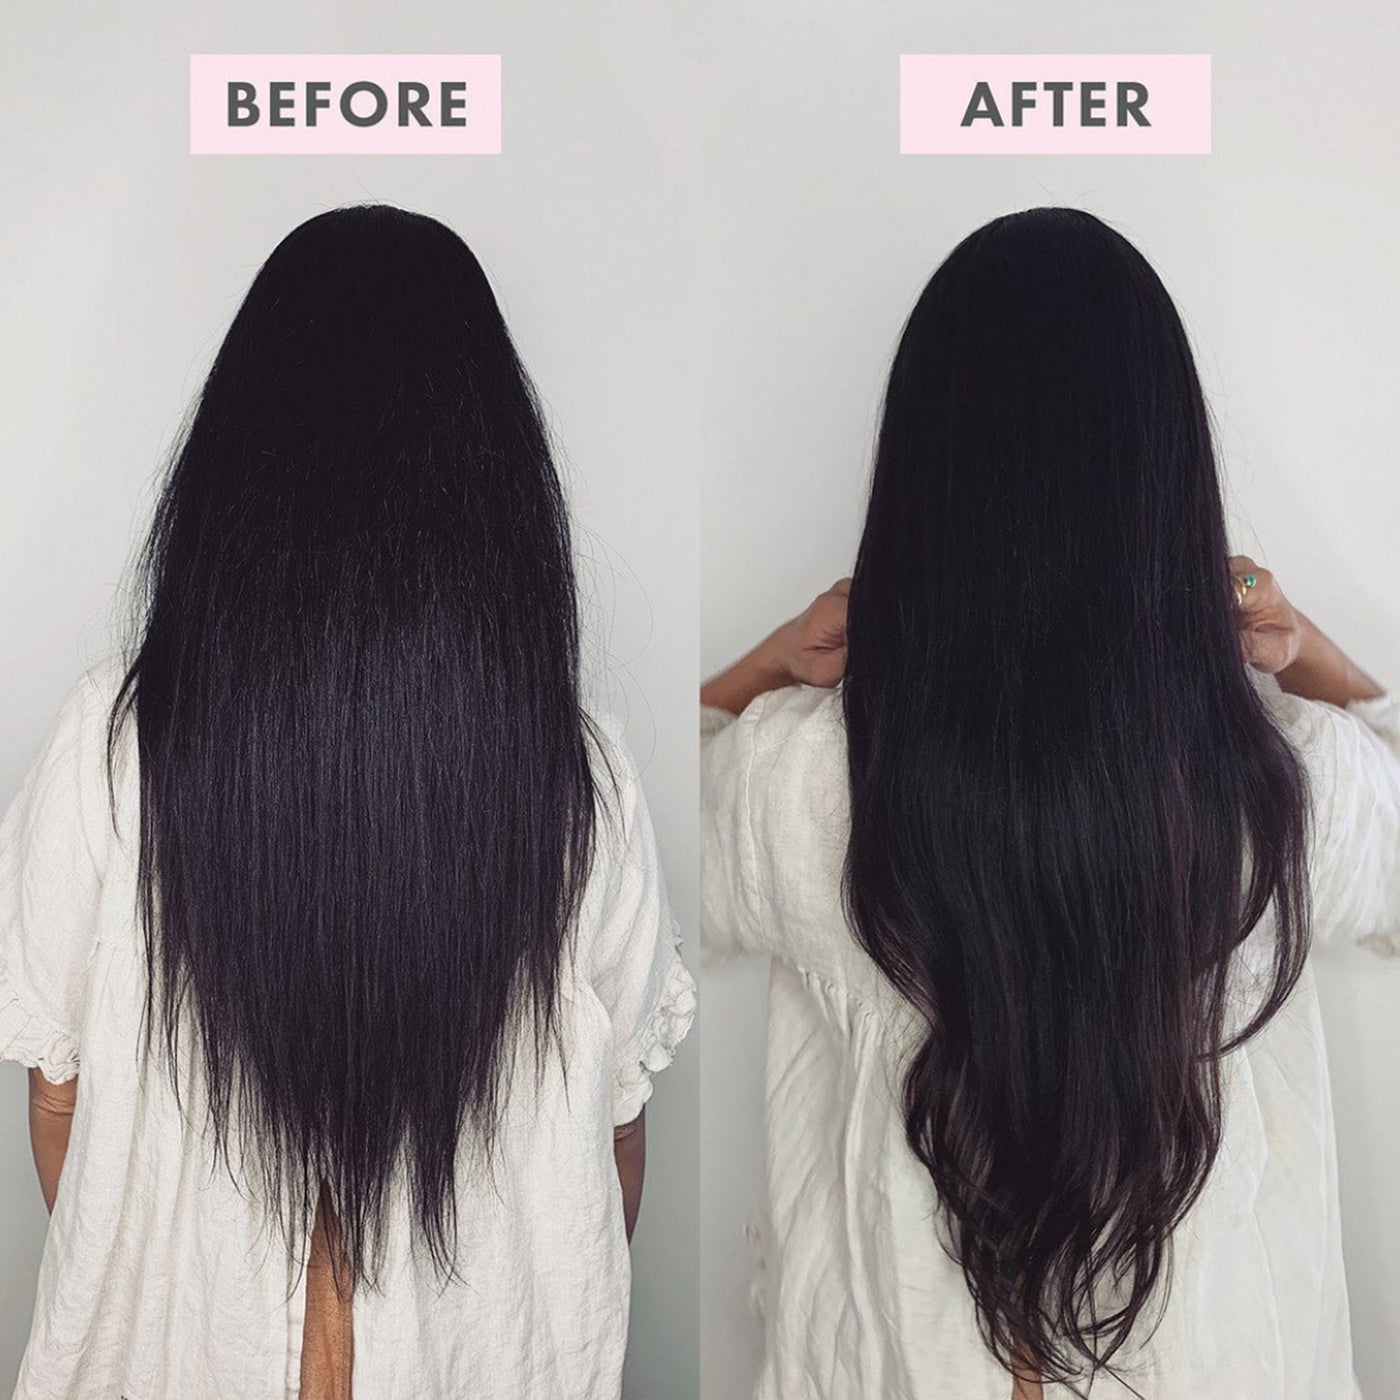 BondiBoost Hair Growth Conditioner (500ml) before and after use